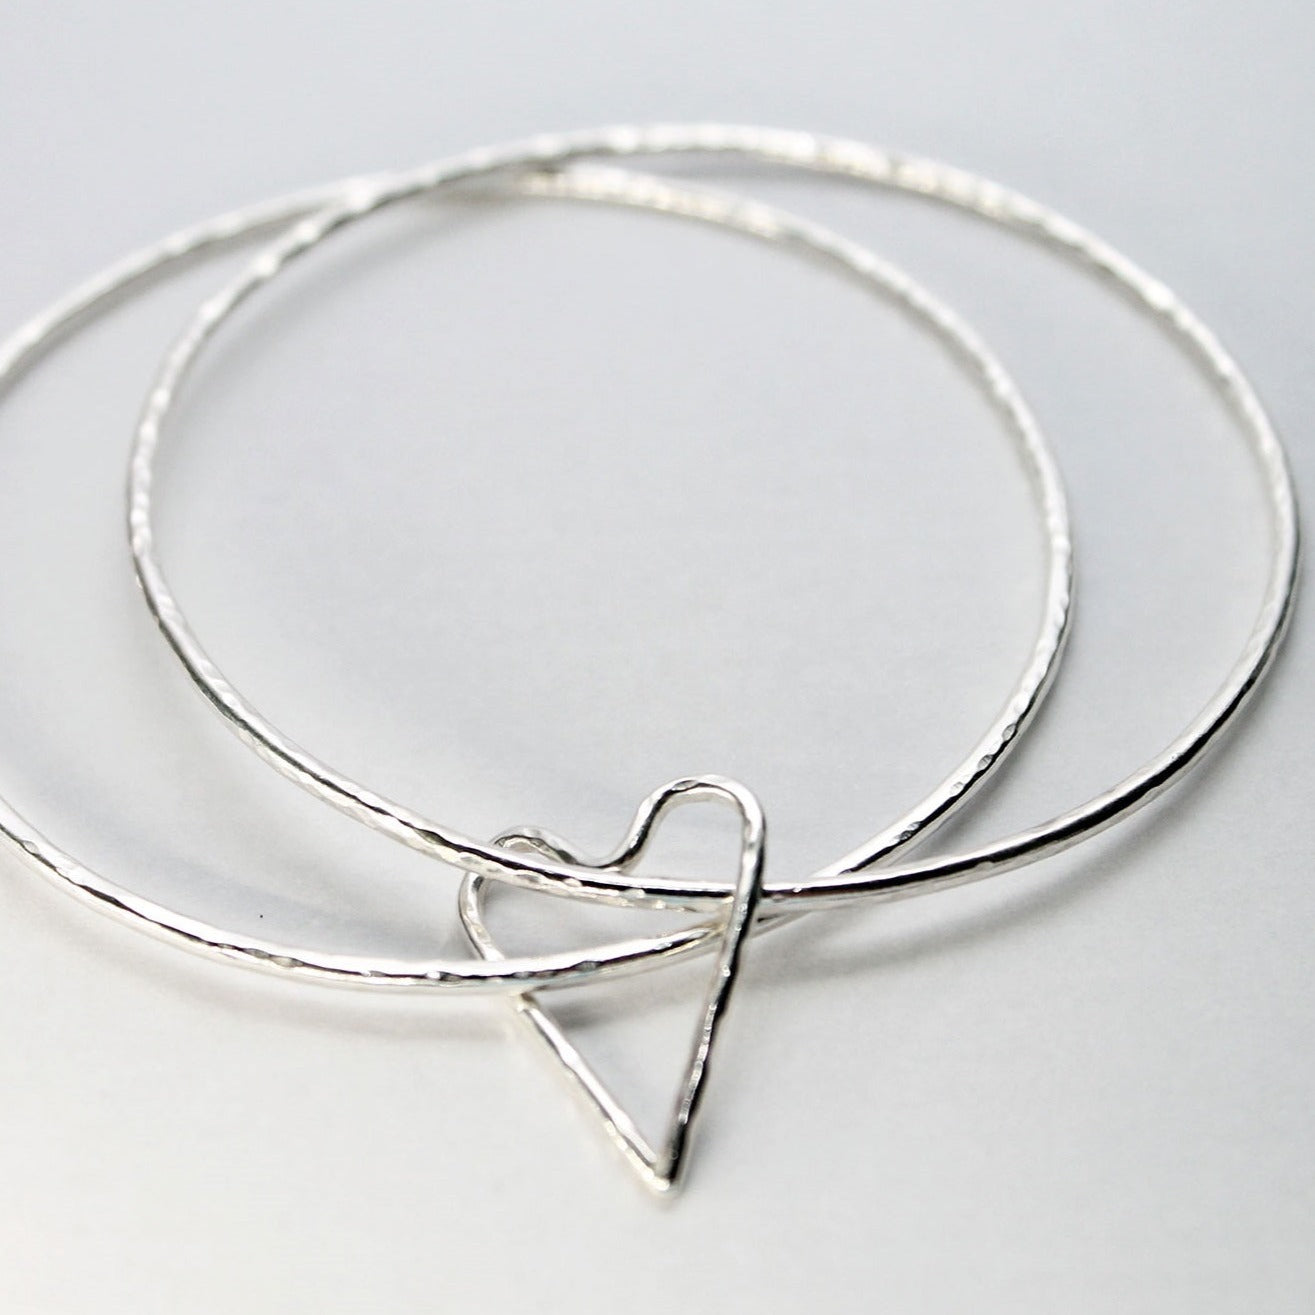 Double Bangle with Open Wire Heart